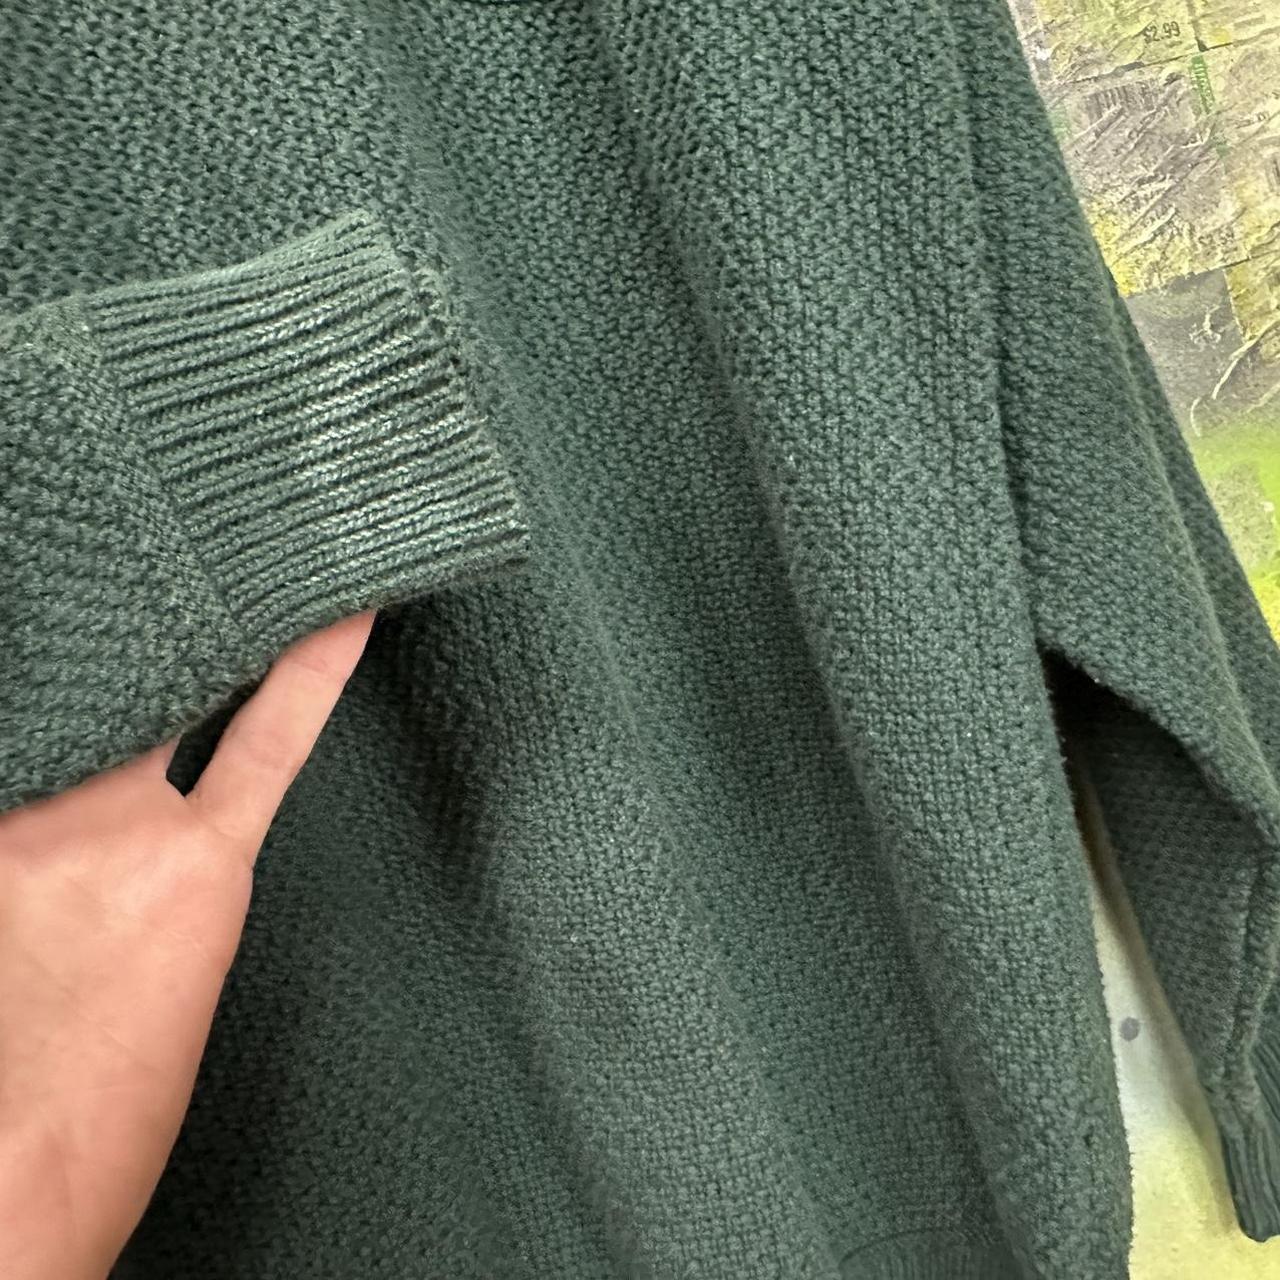 Vintage 90s / 00s fly fishing sweater in a green